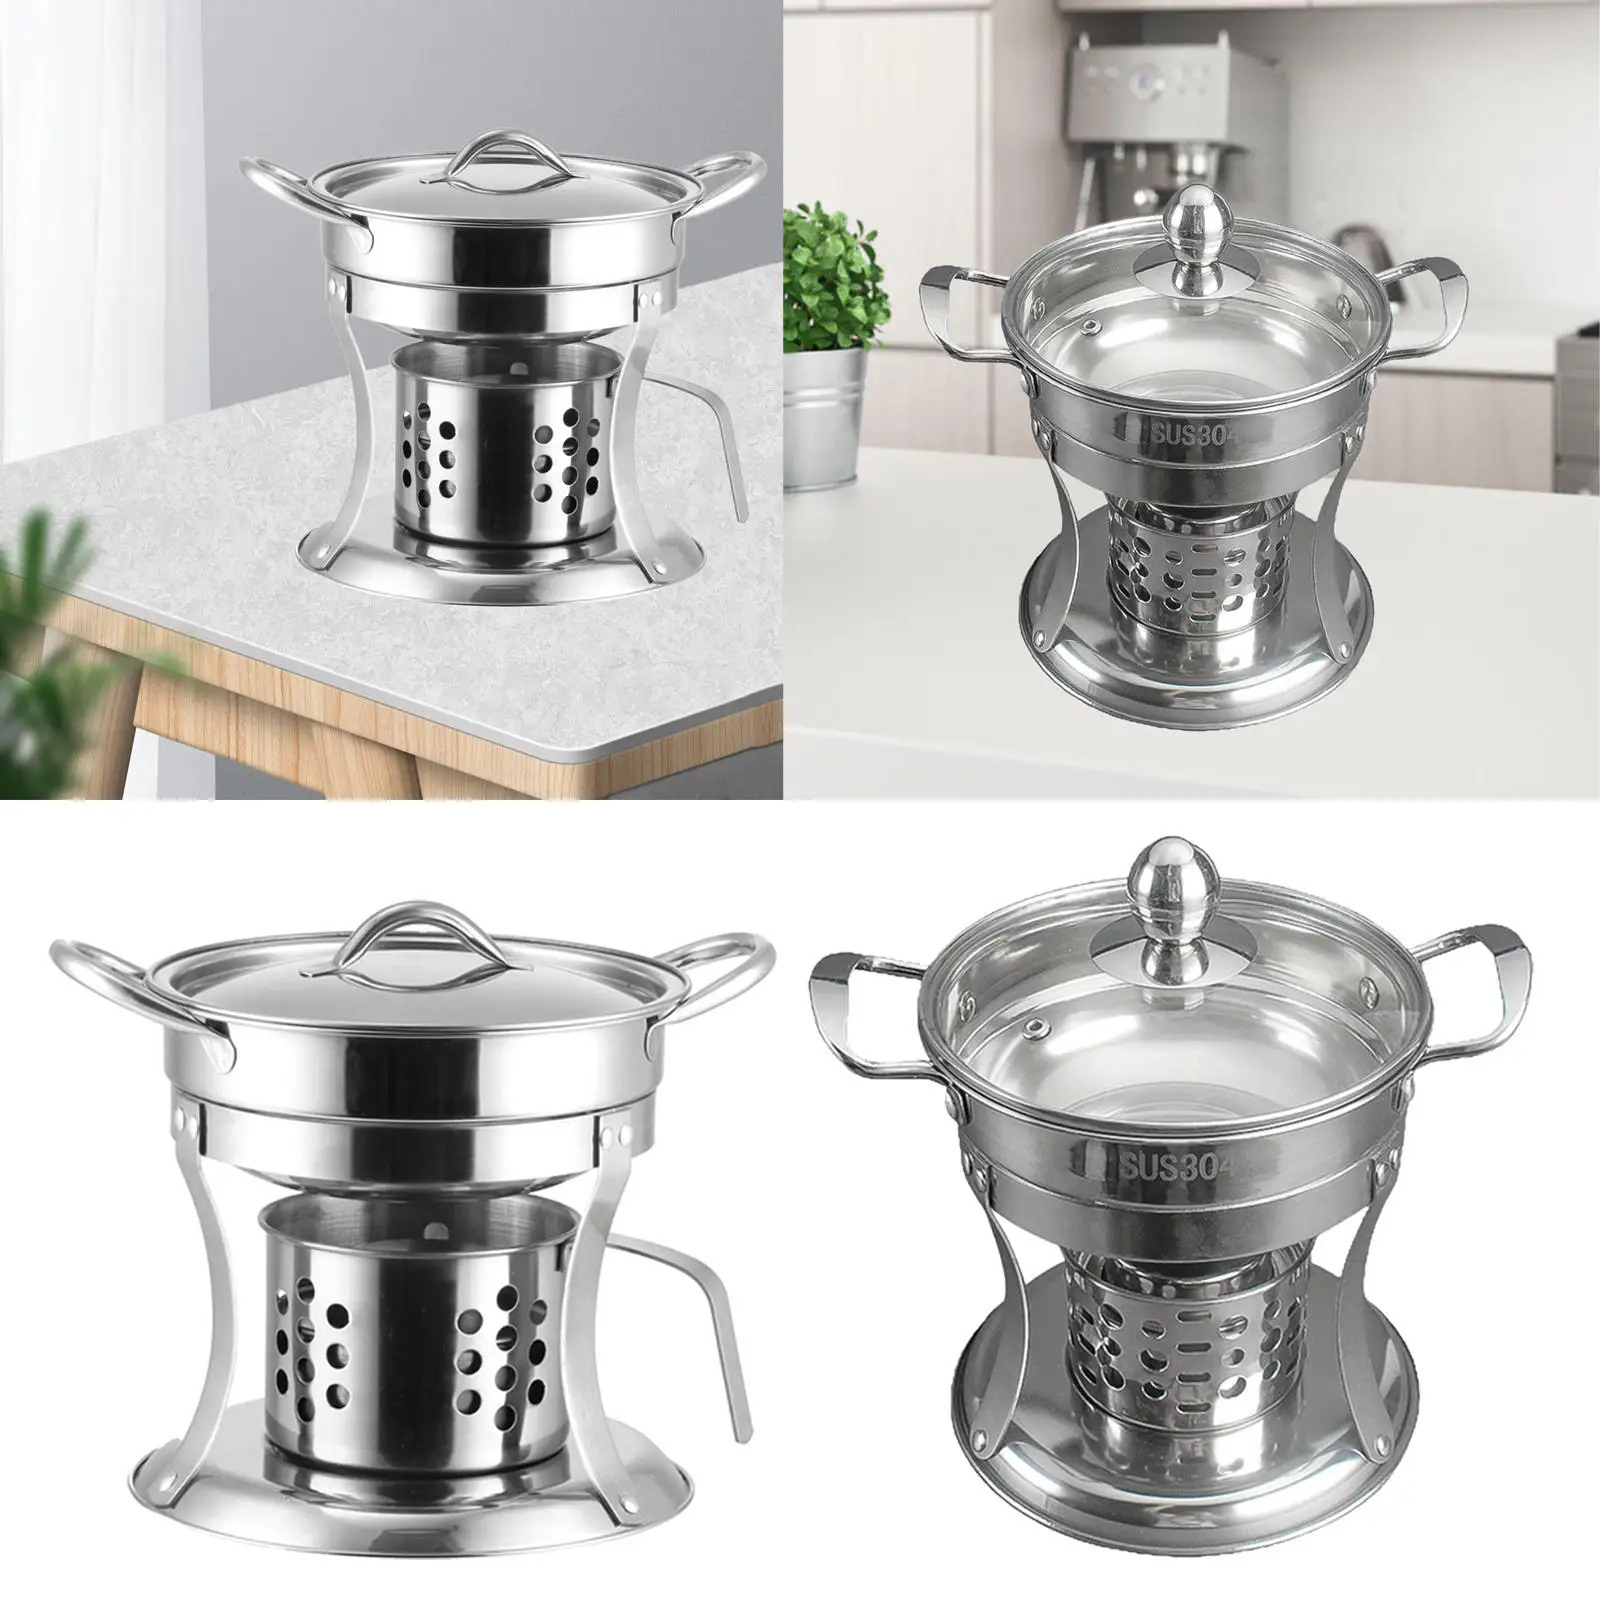 Hot Pot Stainless Steel Chafing Dish Pot Single Mini Cooking Pot Alcohol Burner for Indoor Camping Picnic